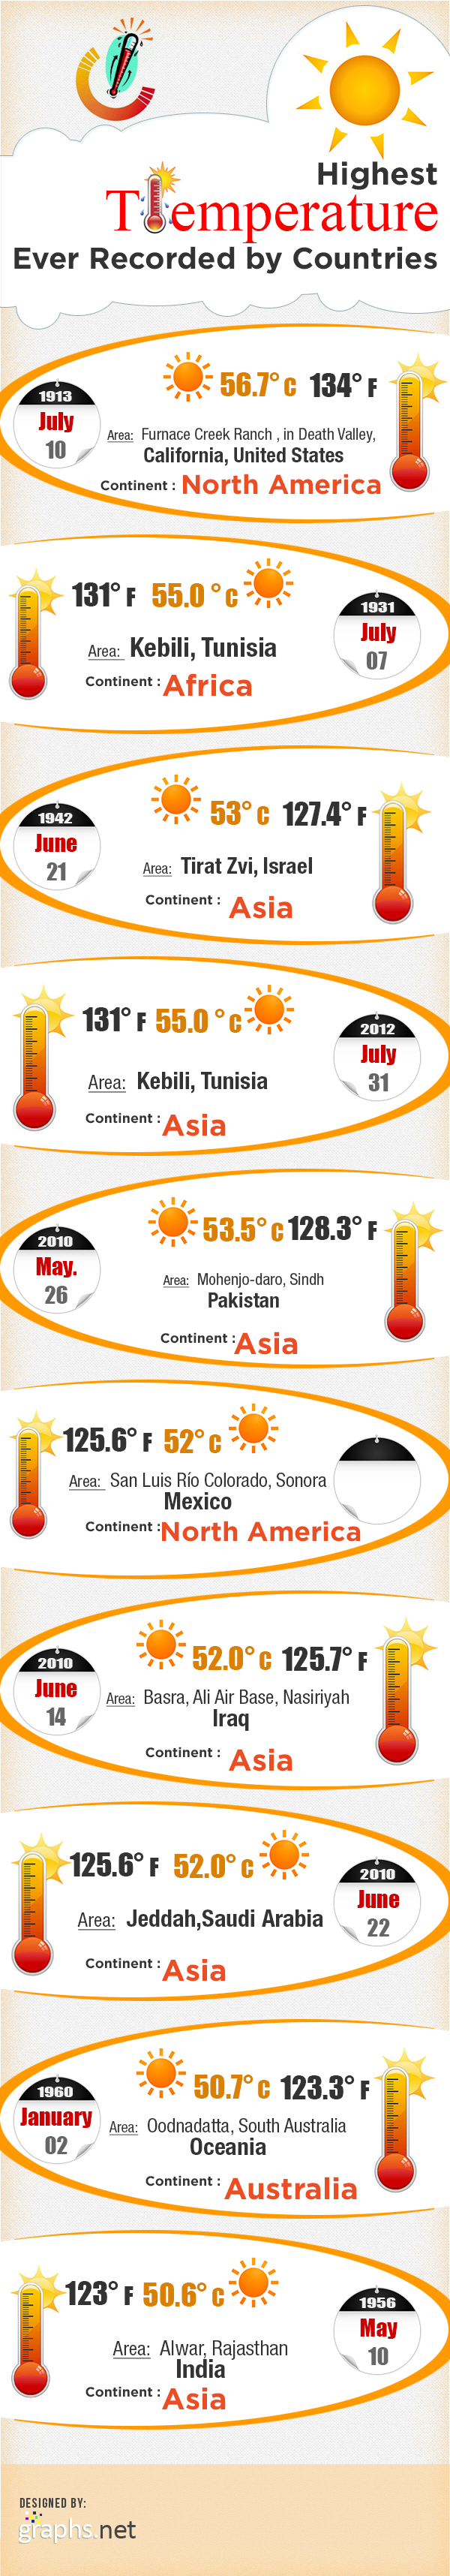 Highest-temperature-ever-recorded-by-country